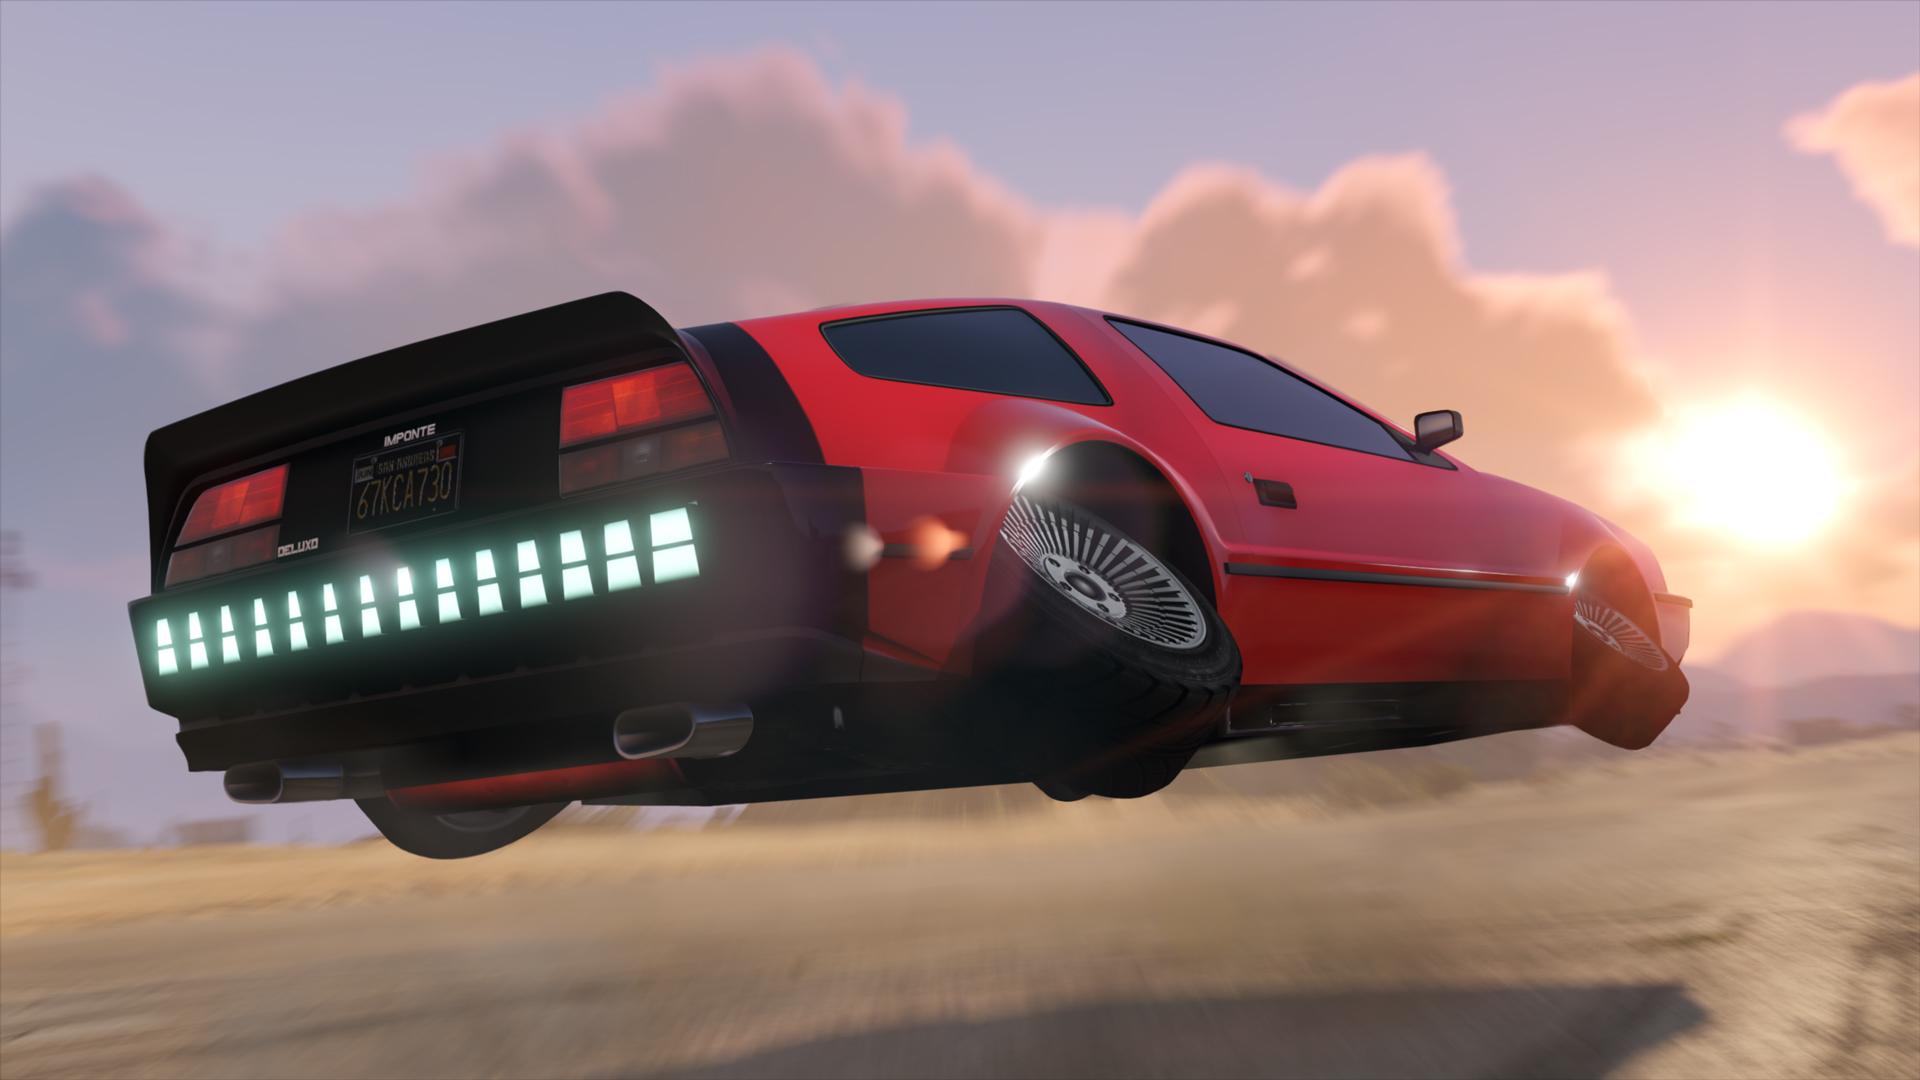 Imponte Deluxo GTA 5 Online Vehicle Stats, Price, How To Get